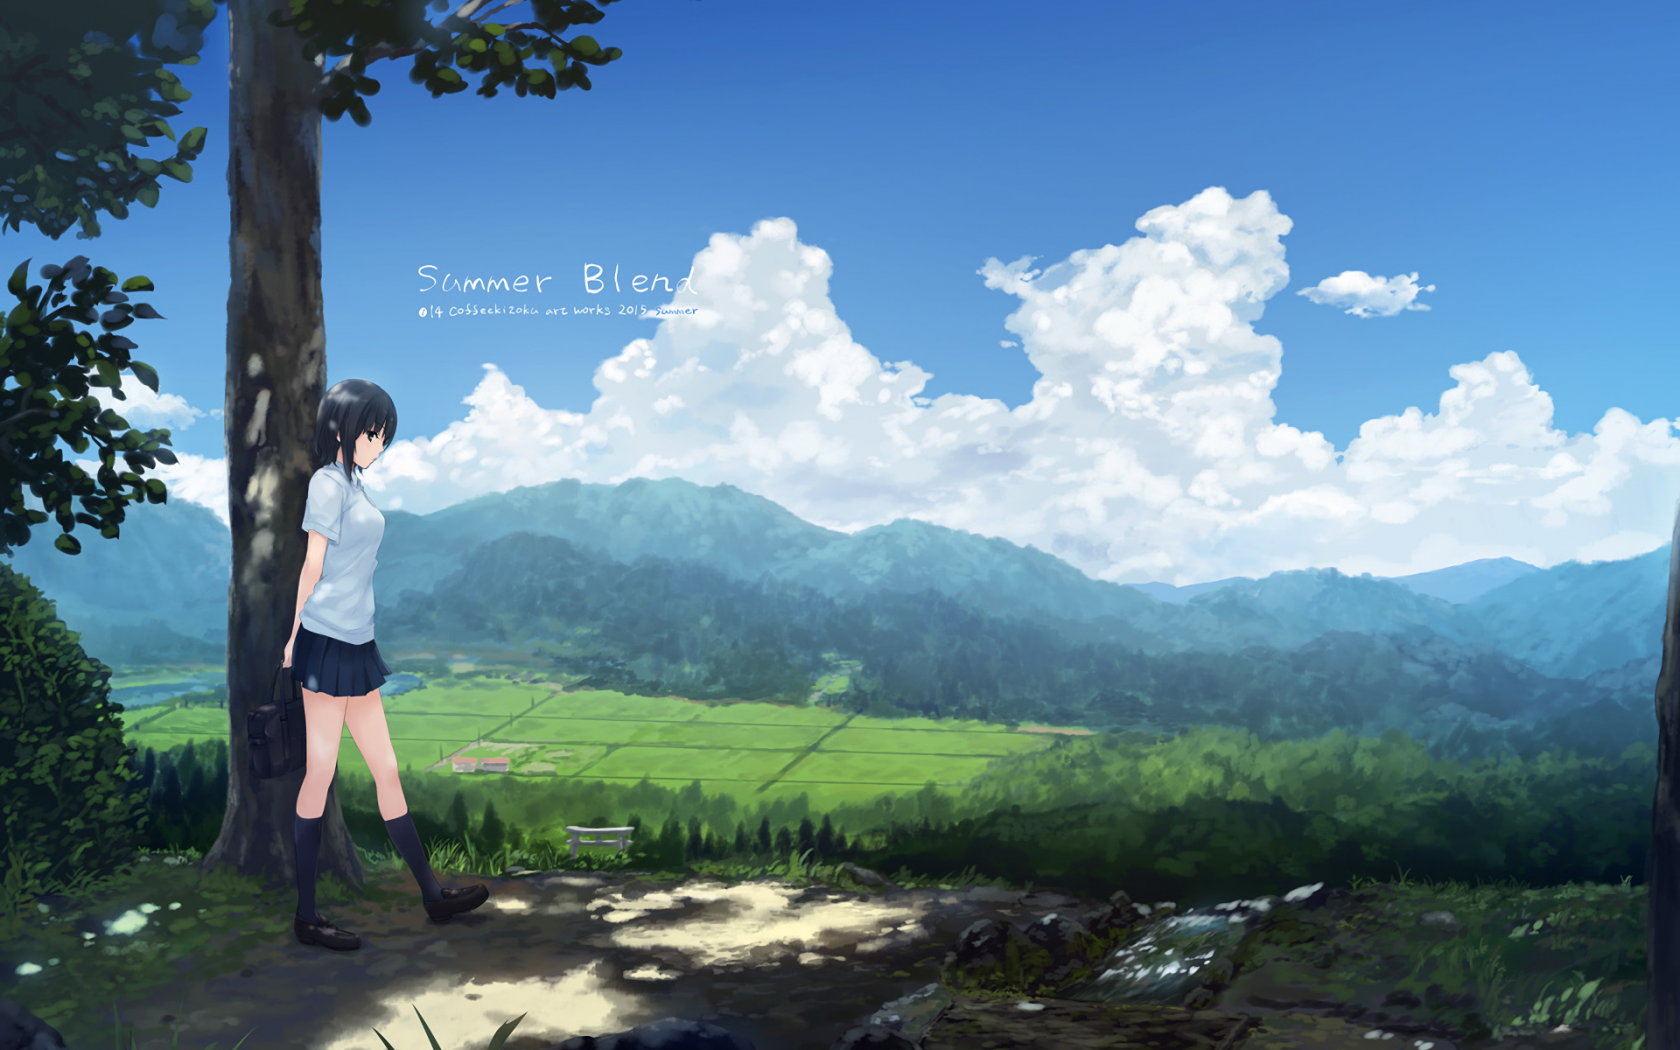 Download 1680x1050 Anime Landscape, Scenic, Girl, Summer Blend, Sky, Clouds, Field Wallpaper for MacBook Pro 15 inch